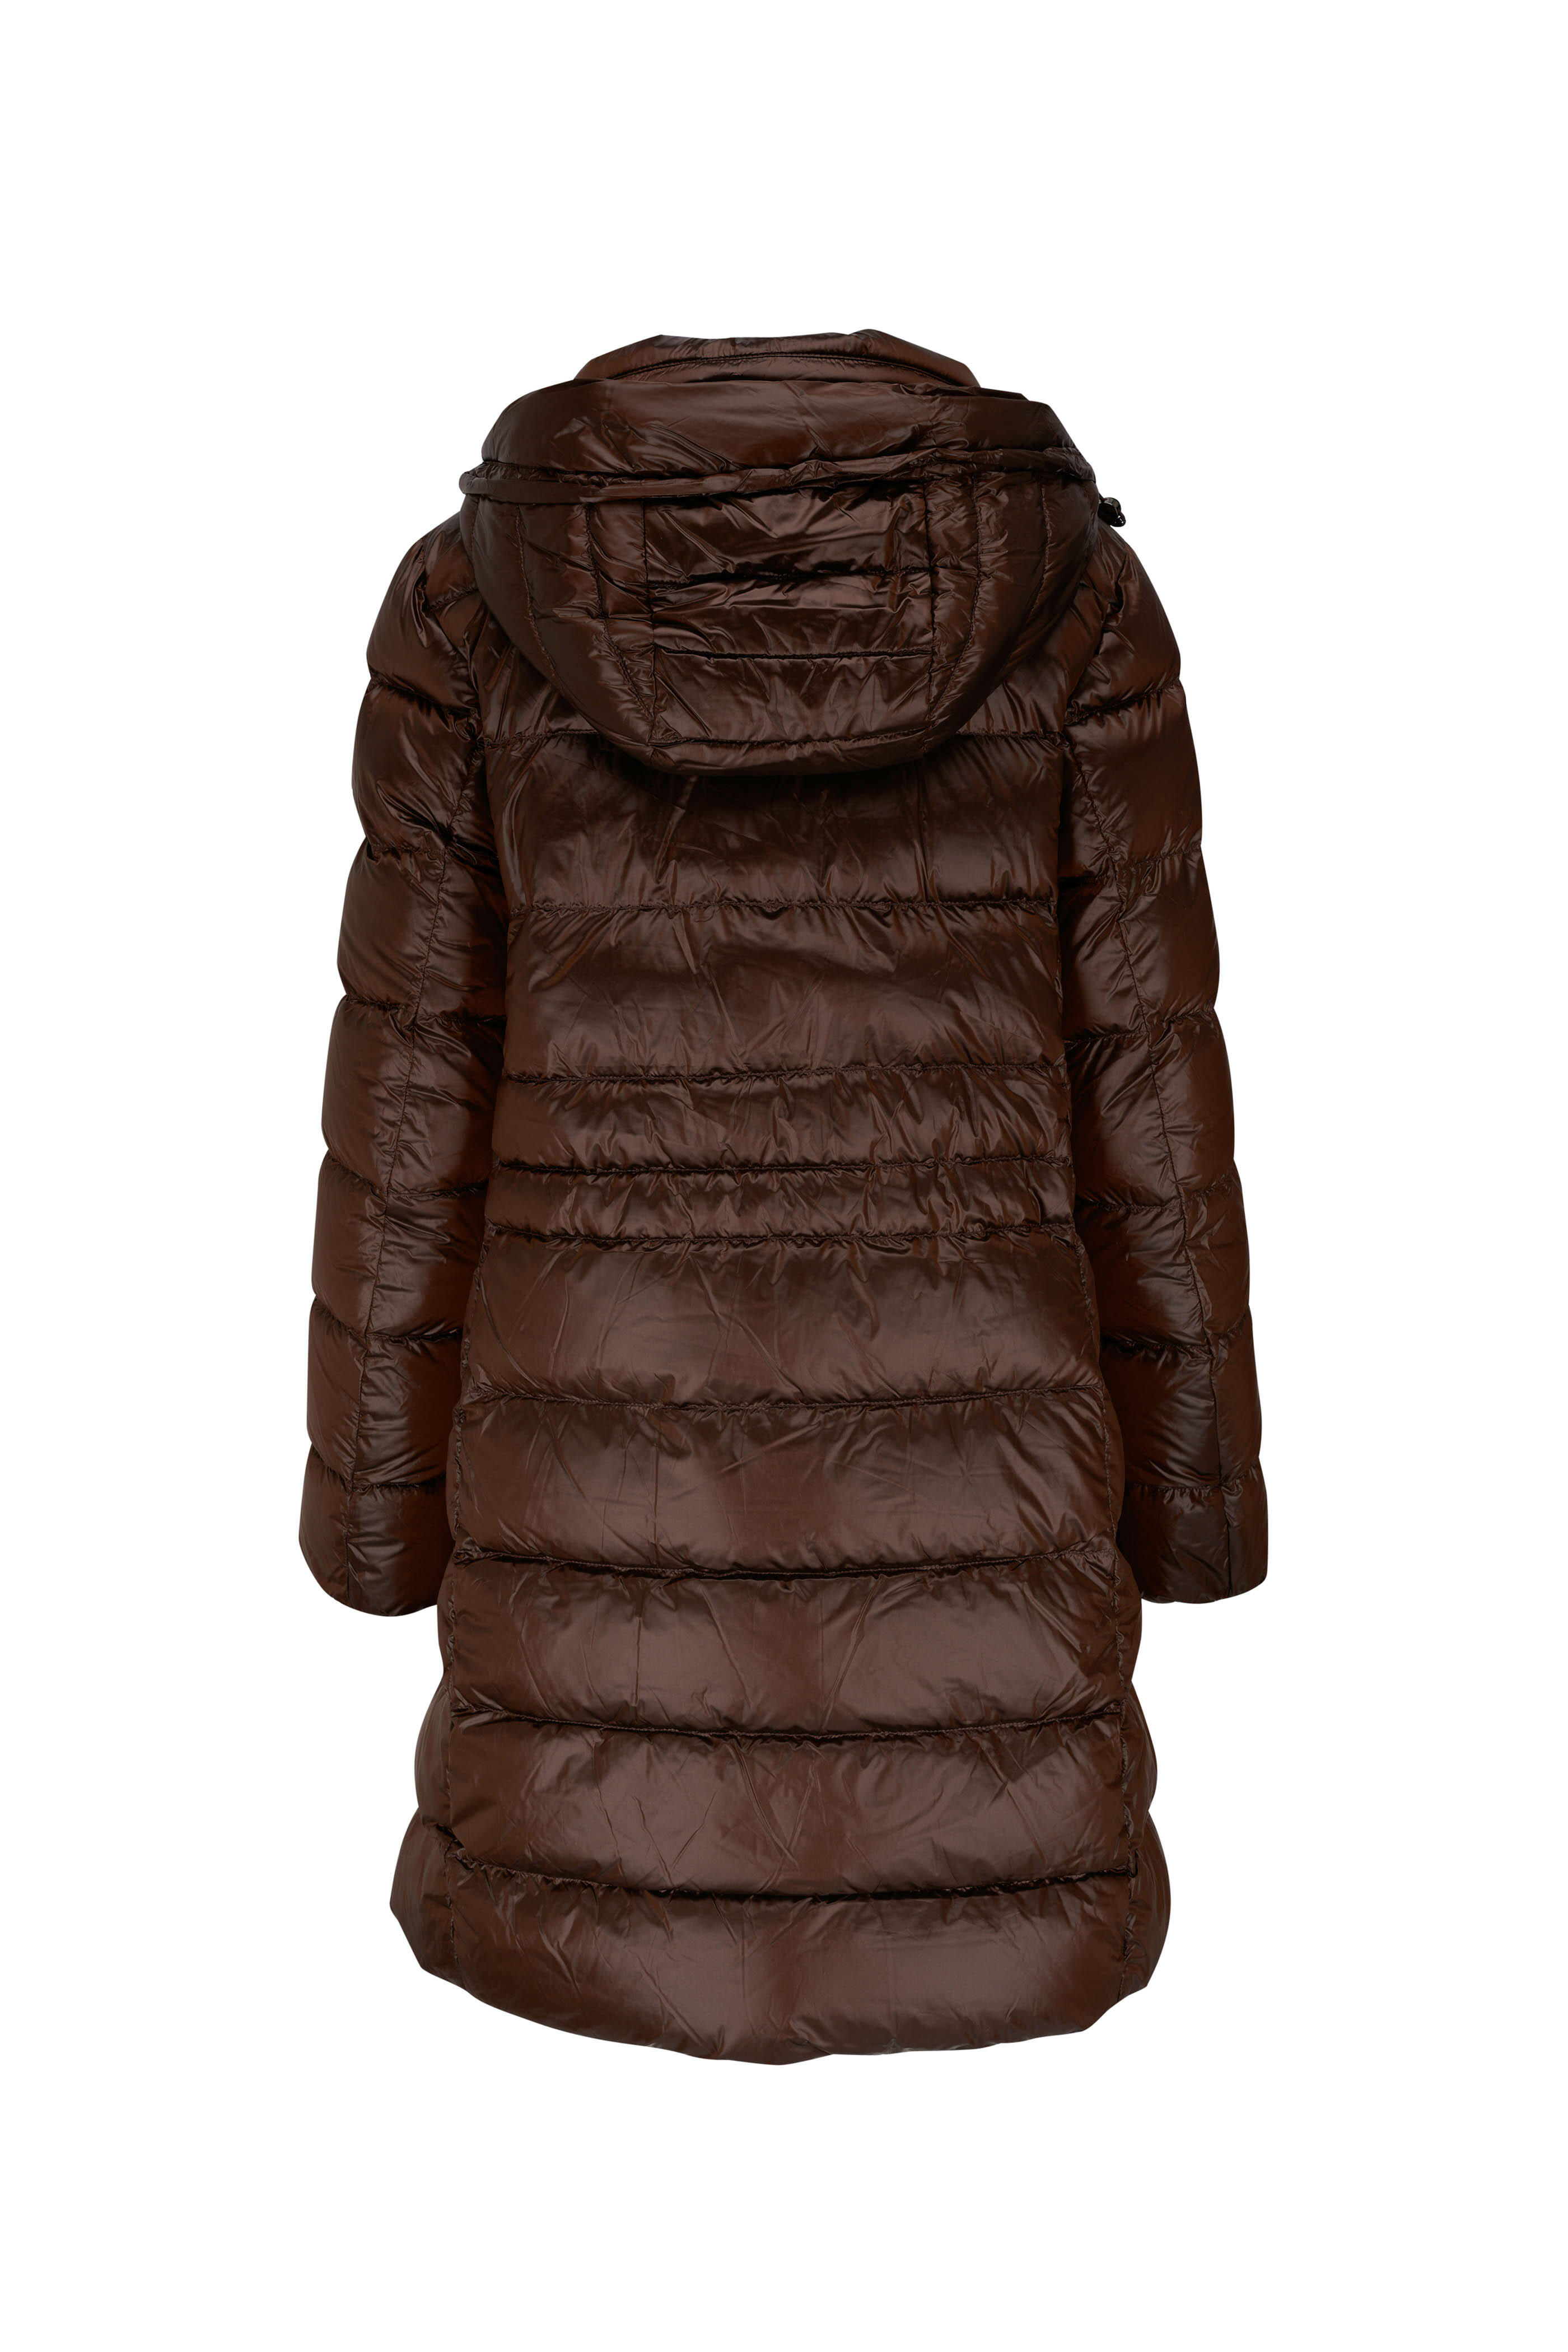 Beige Down Jacket with Brown Furs Collar and Branded Belt Louis Vuitton